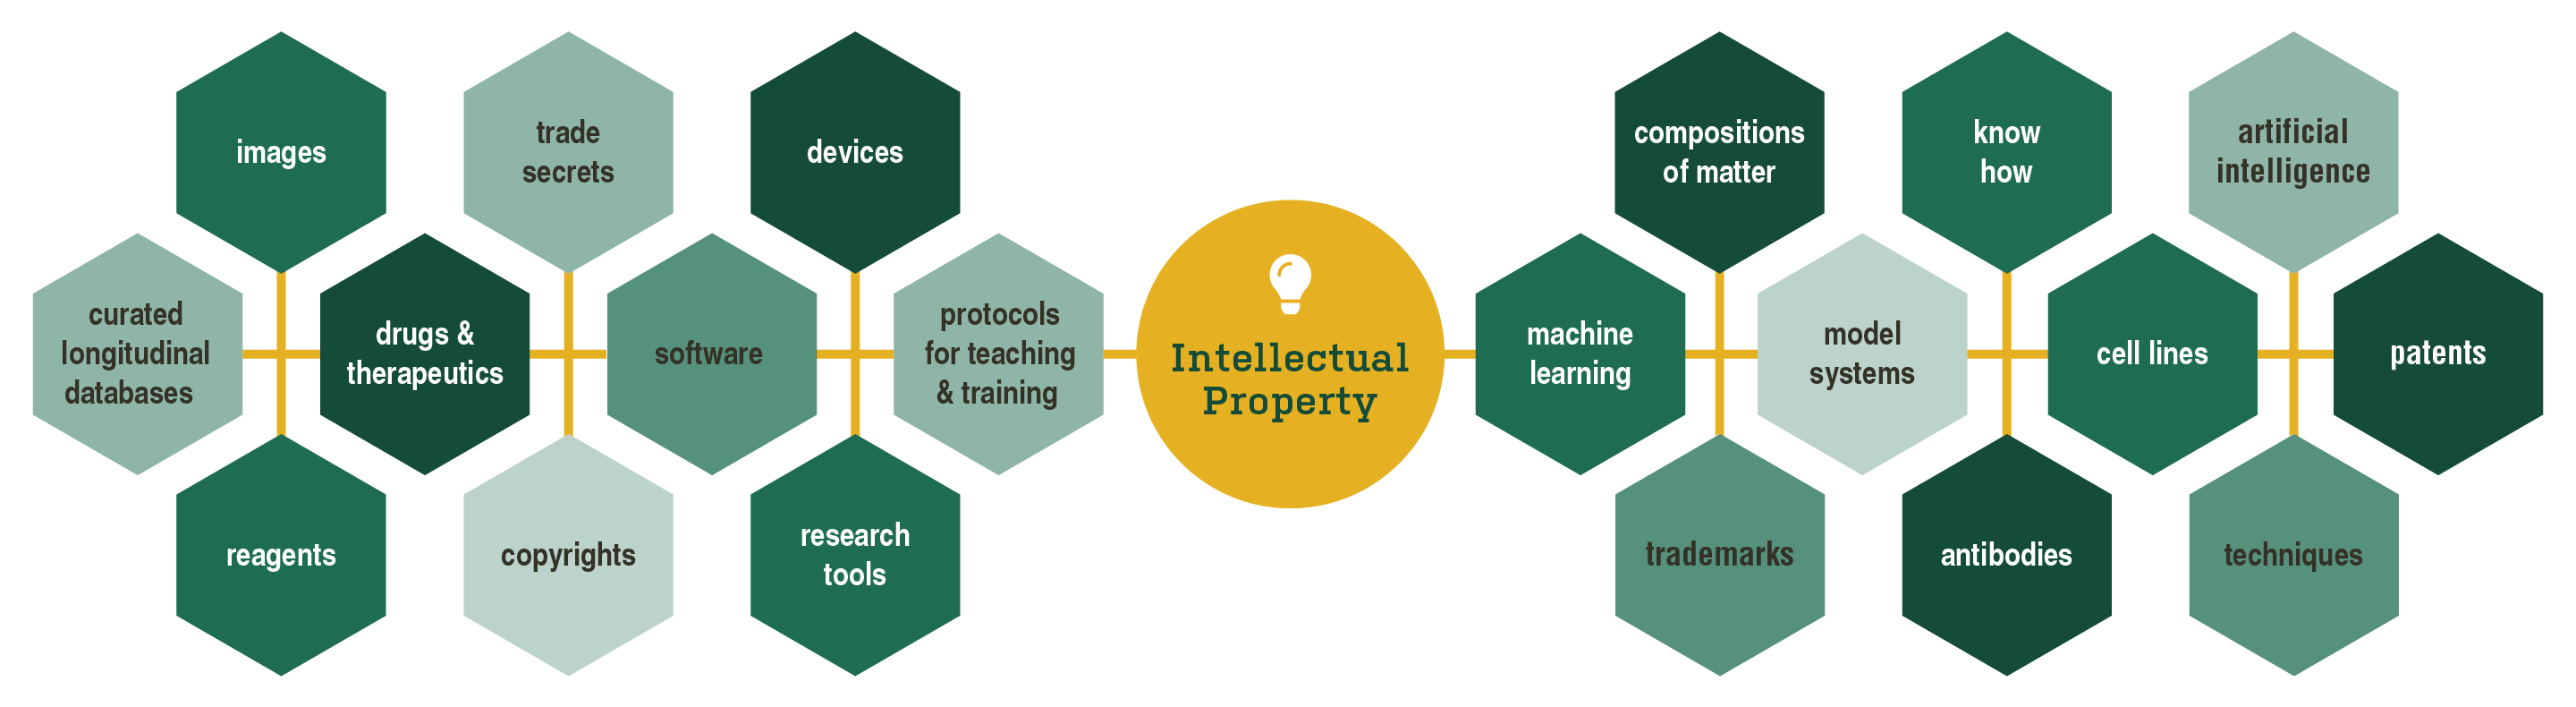 types intellectual property